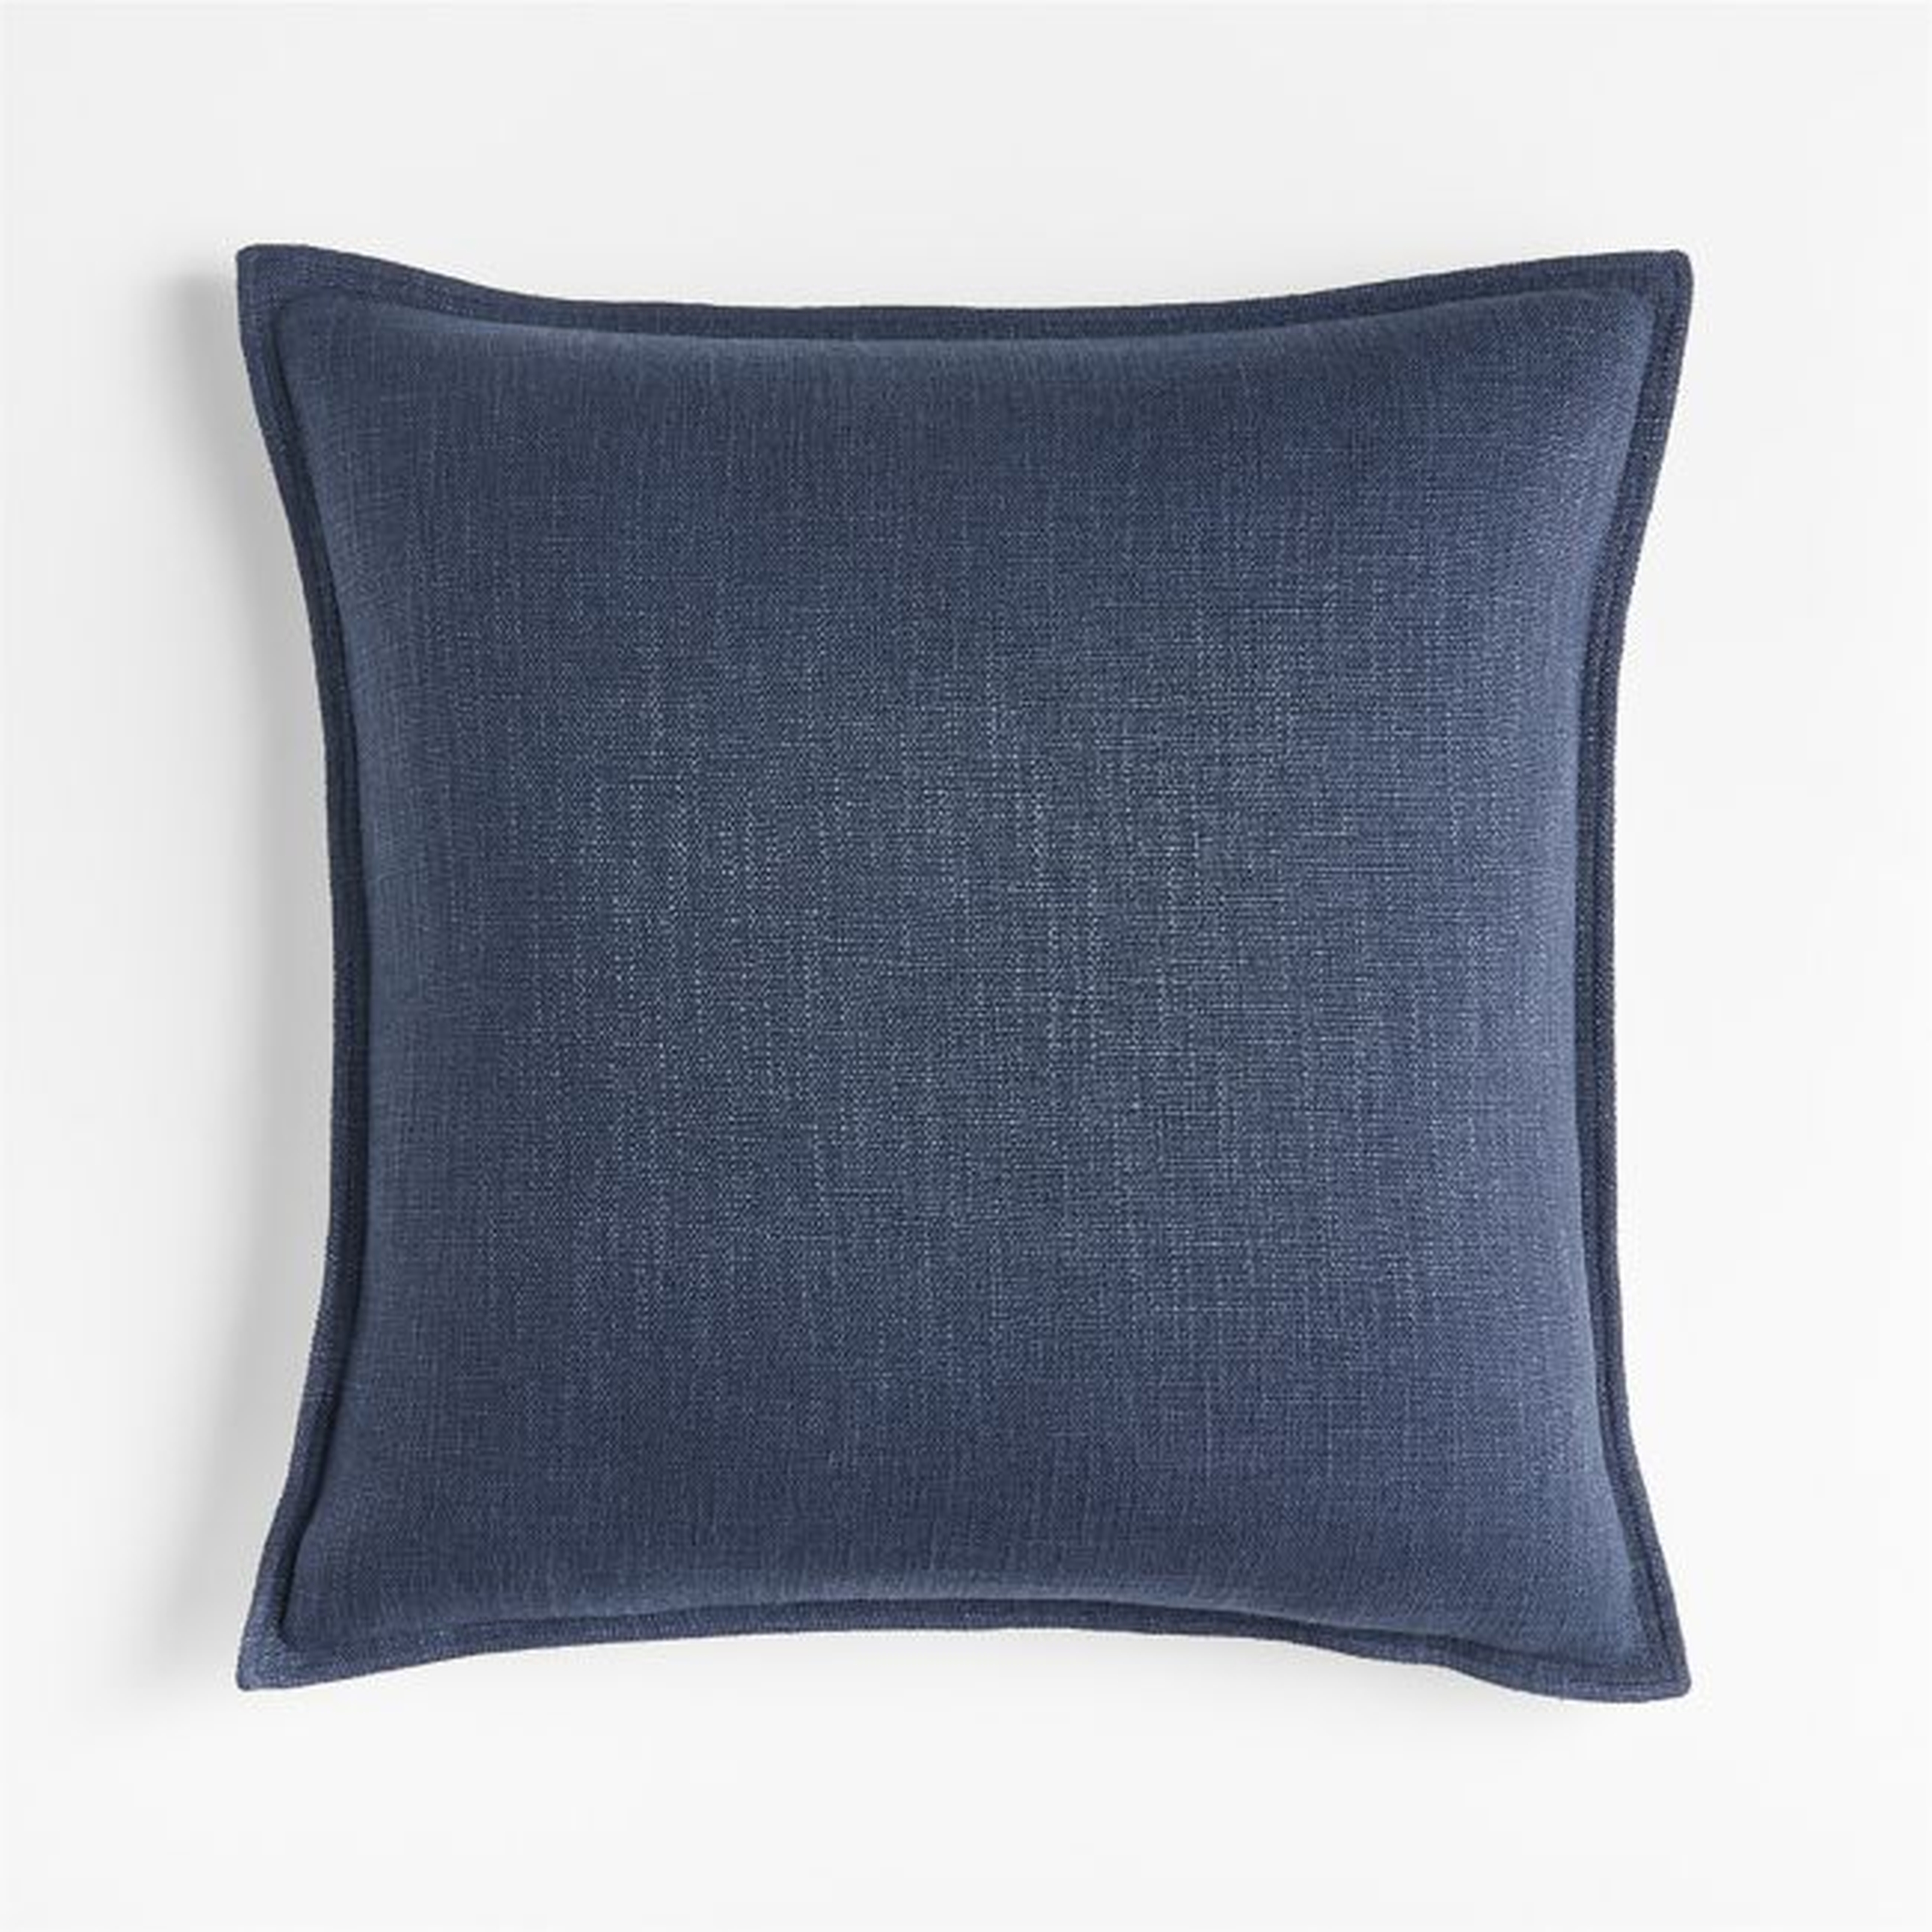 Indigo 20"x20" Laundered Linen Throw Pillow with Down-Alternative Insert - Crate and Barrel